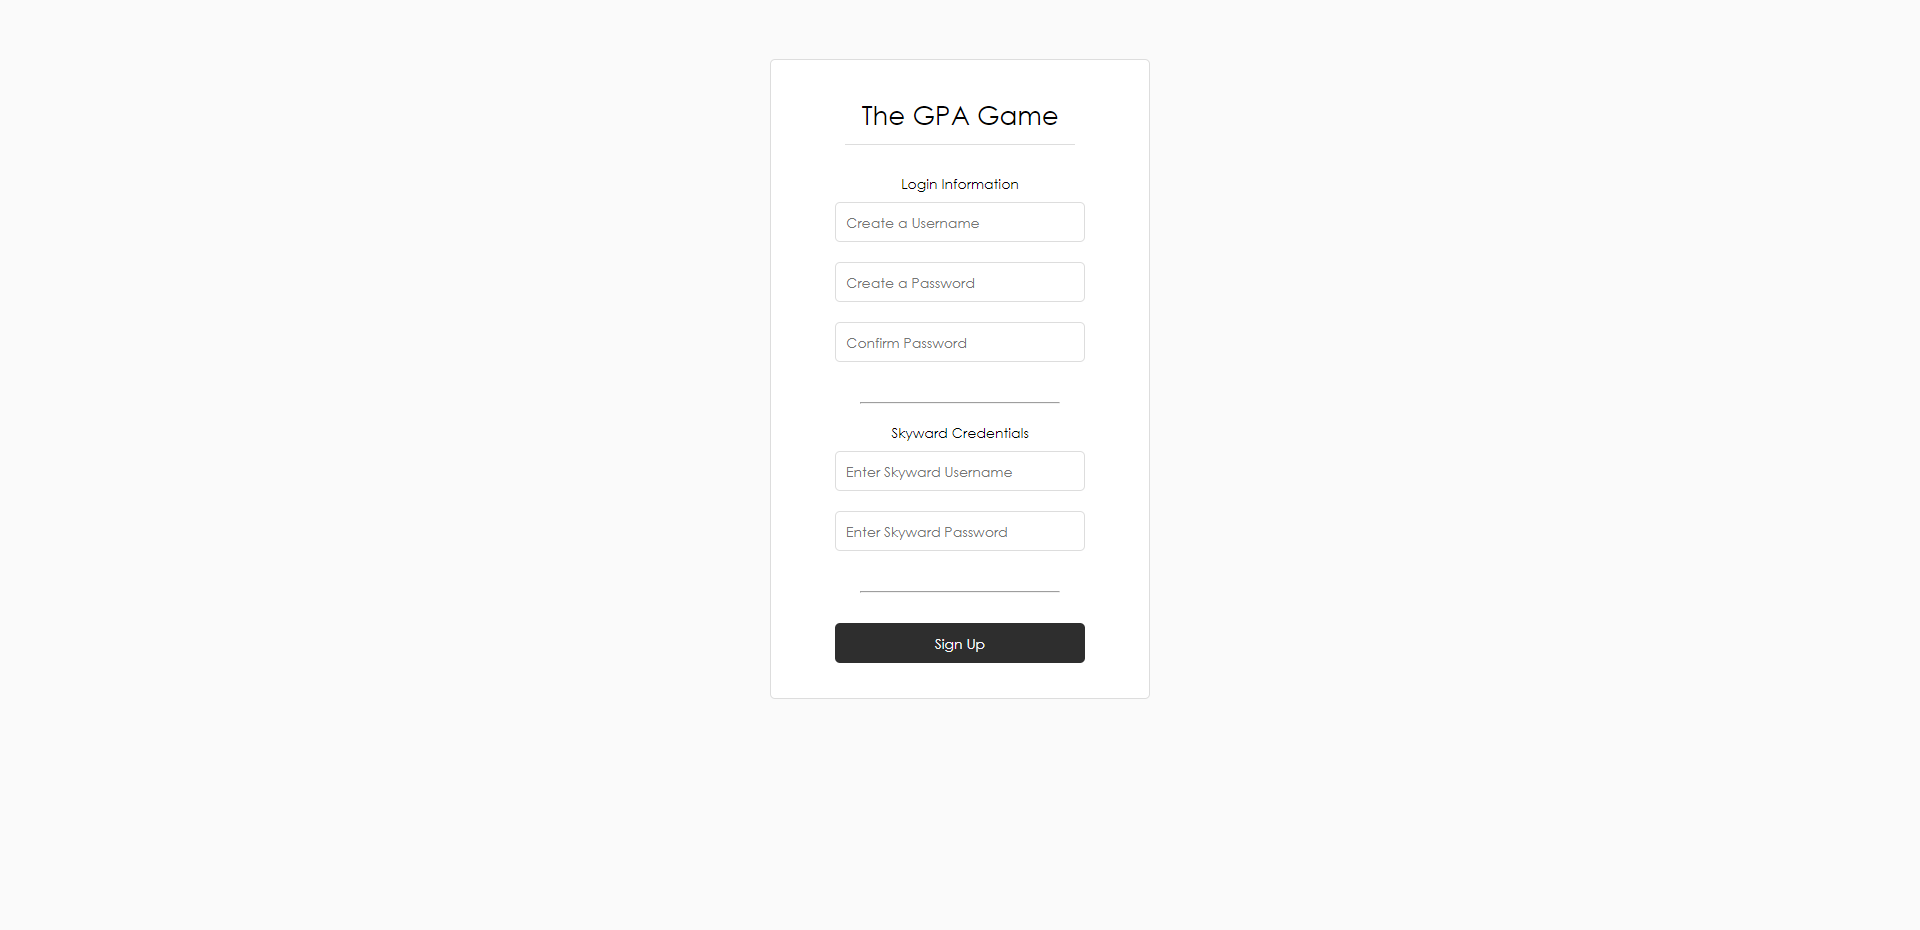 The signup form accepting user credentials